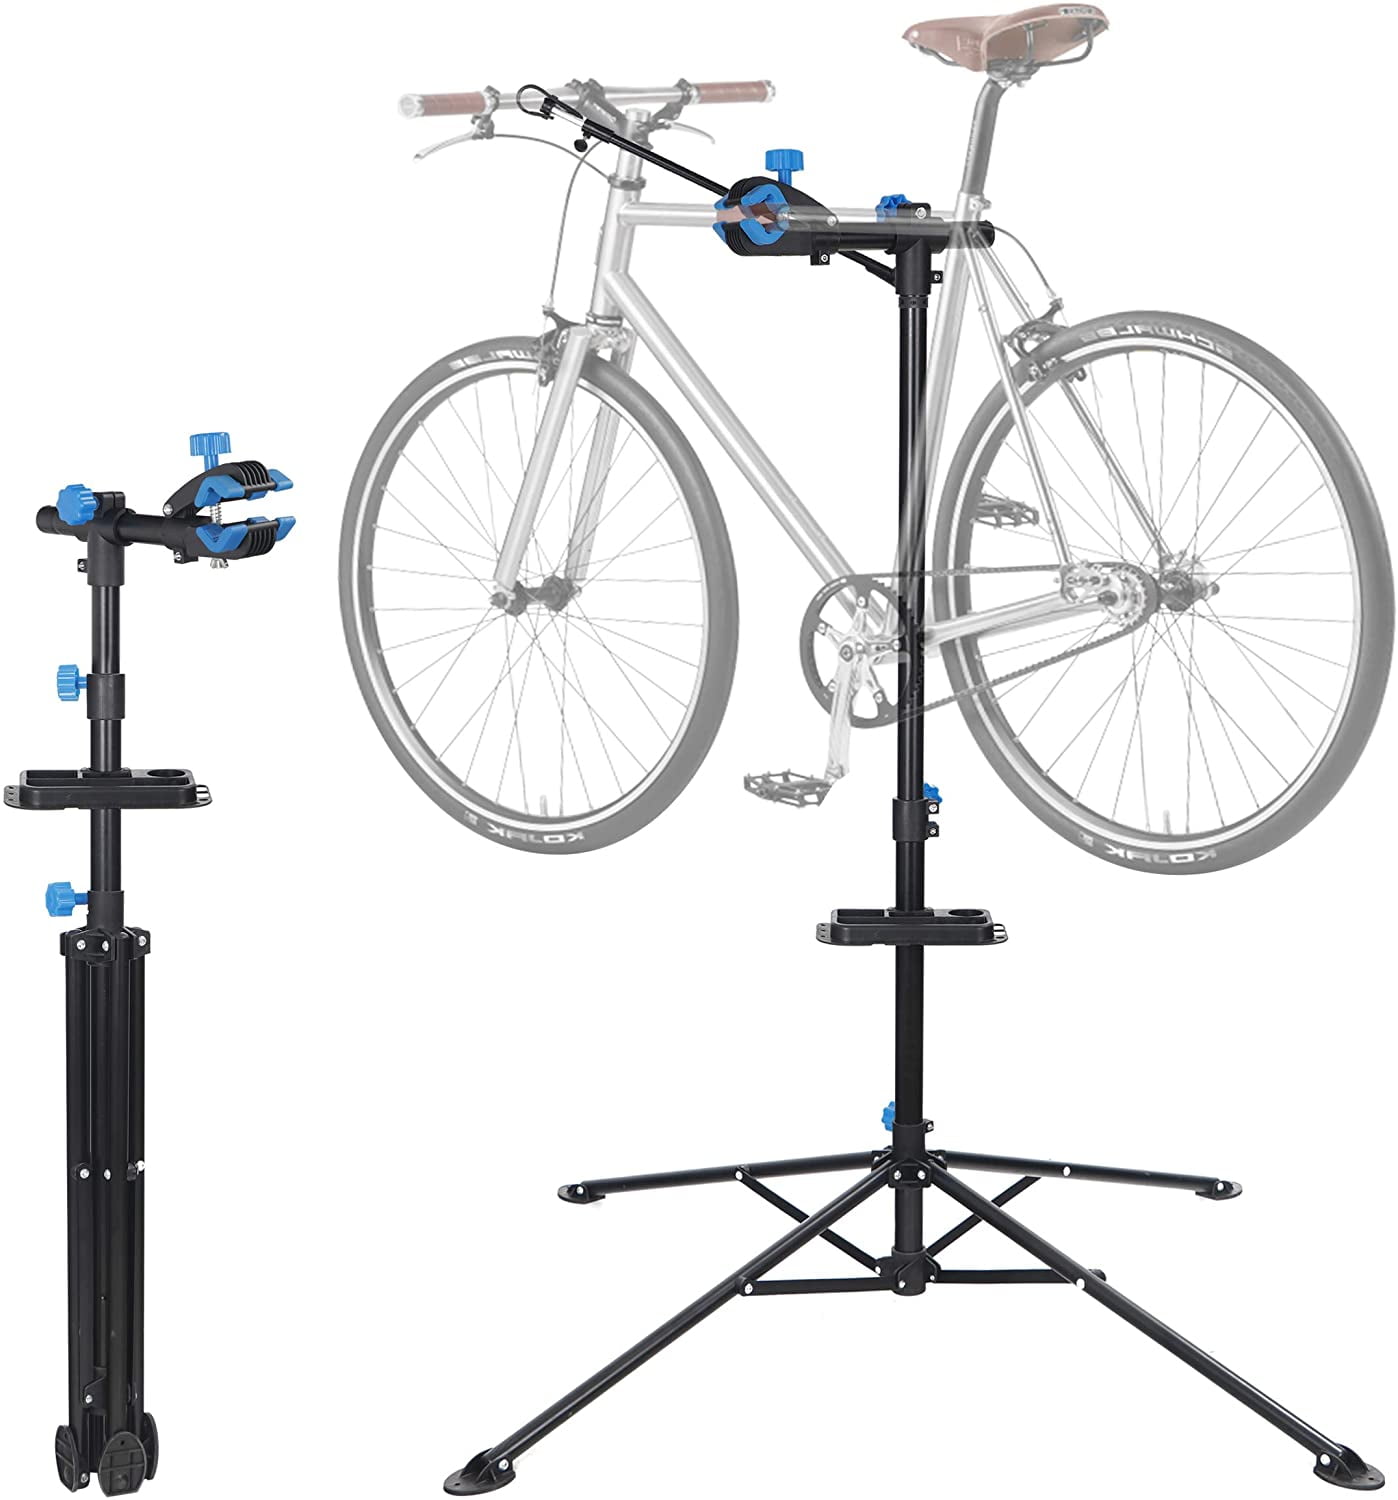 Pro Bike Adjustable 42" To 74" Repair Stand W/Telescopic Arm Bicycle Cycle Rack 